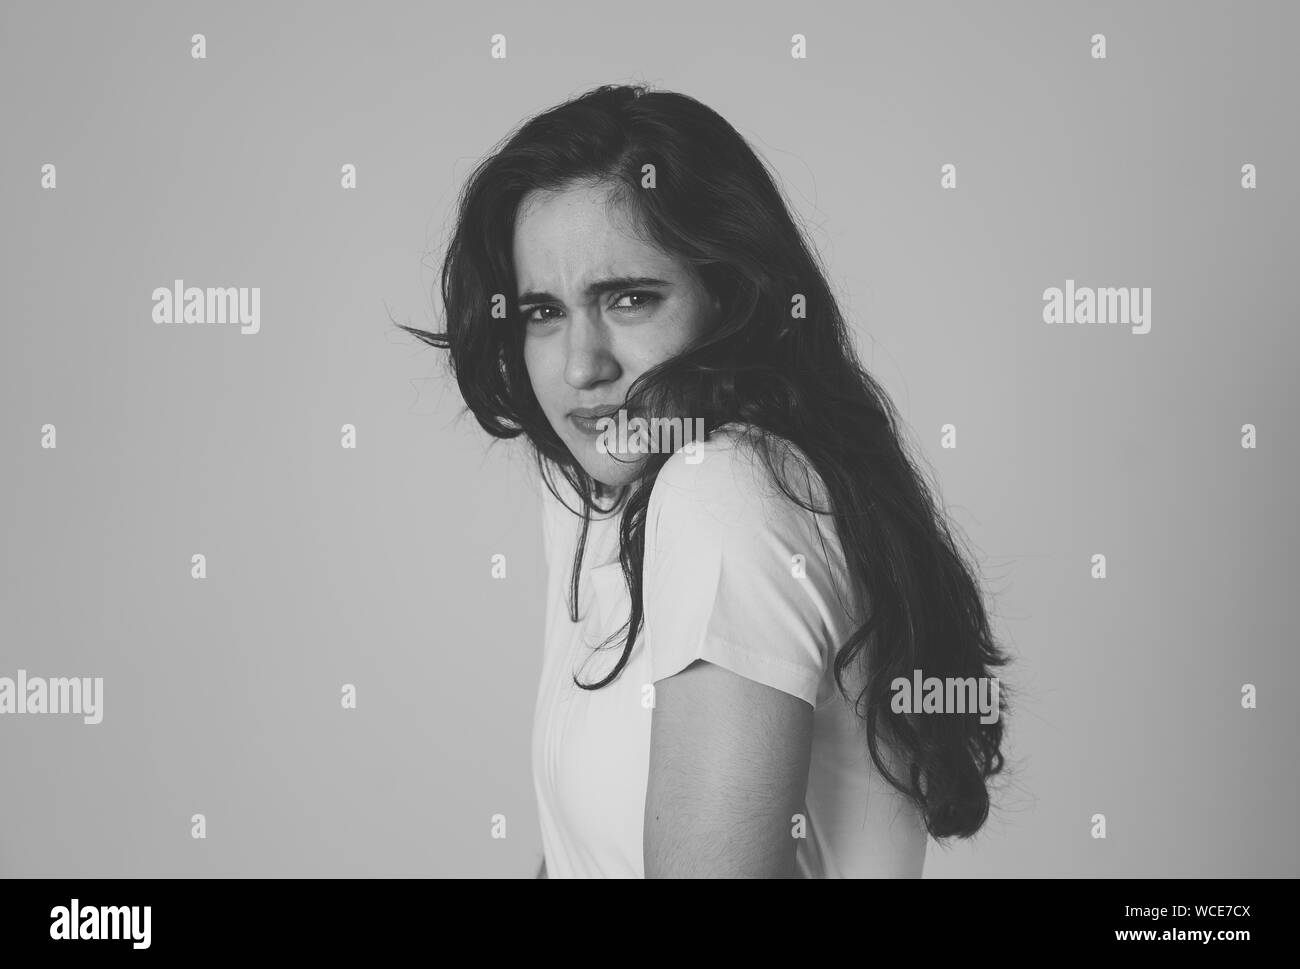 Portrait of young latin woman feeling scared and shocked making fear, anxiety gestures. Looking terrified covering herself. Copy space. In negative hu Stock Photo